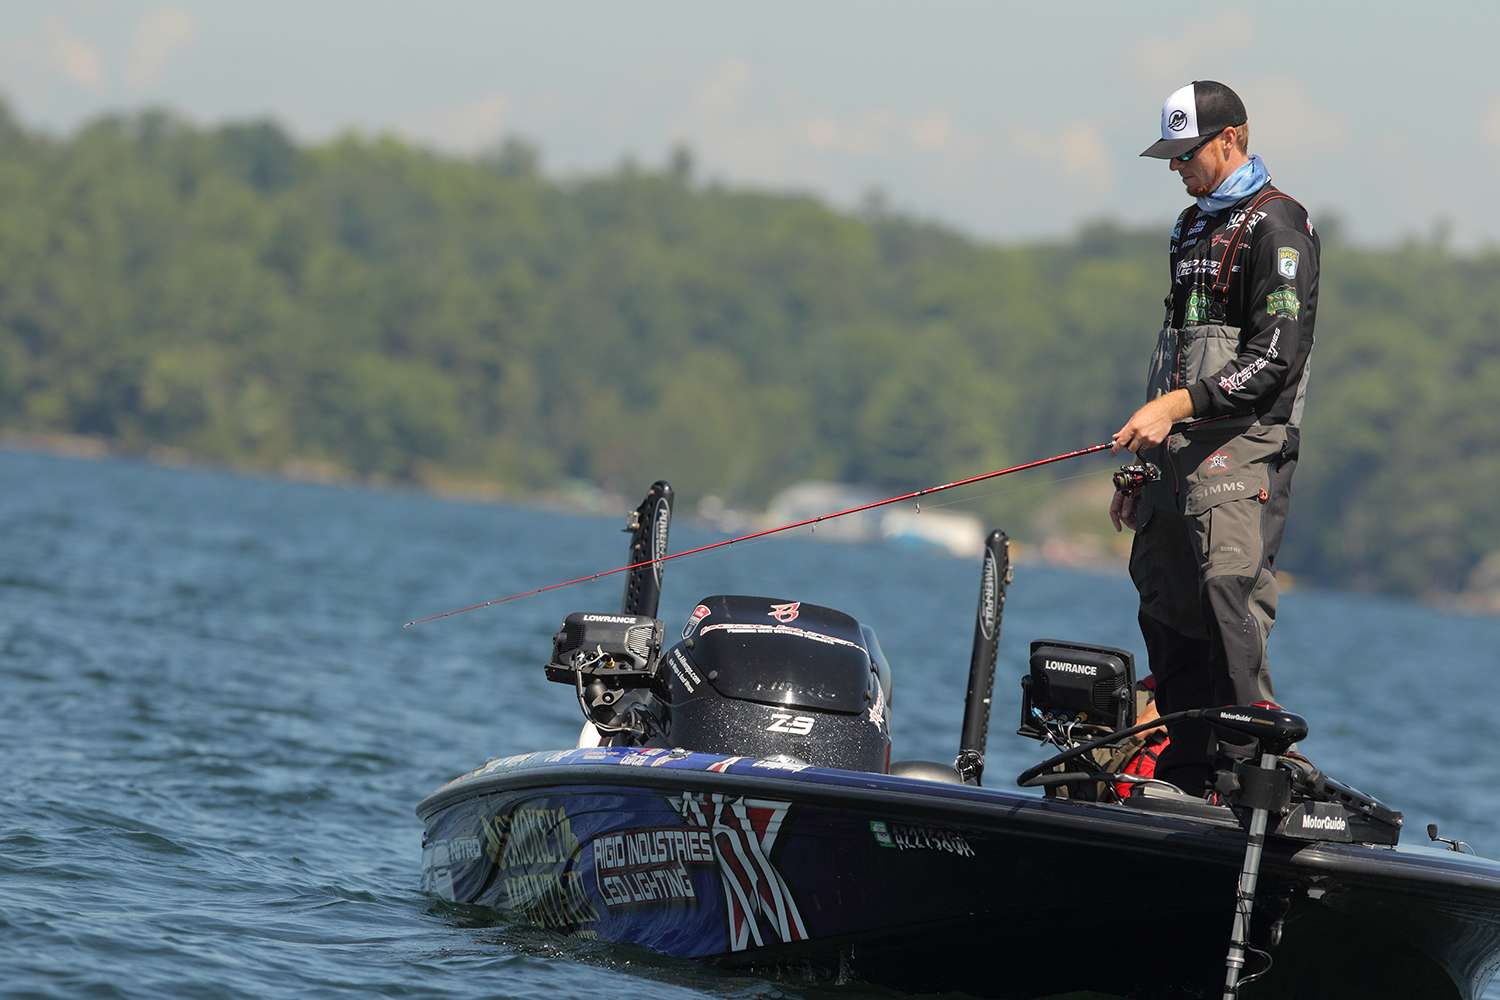 Josh Bertrand joined the Bassmaster Elite Series in 2013, and the Arizona native fished both the Central Opens and the Elite Series during the 2015 tournament season. Bertrand finished in the money on five Elite Series stops, and he notched a Top 10 finish on Table Rock in the 2015 Bassmaster Central Open #3.